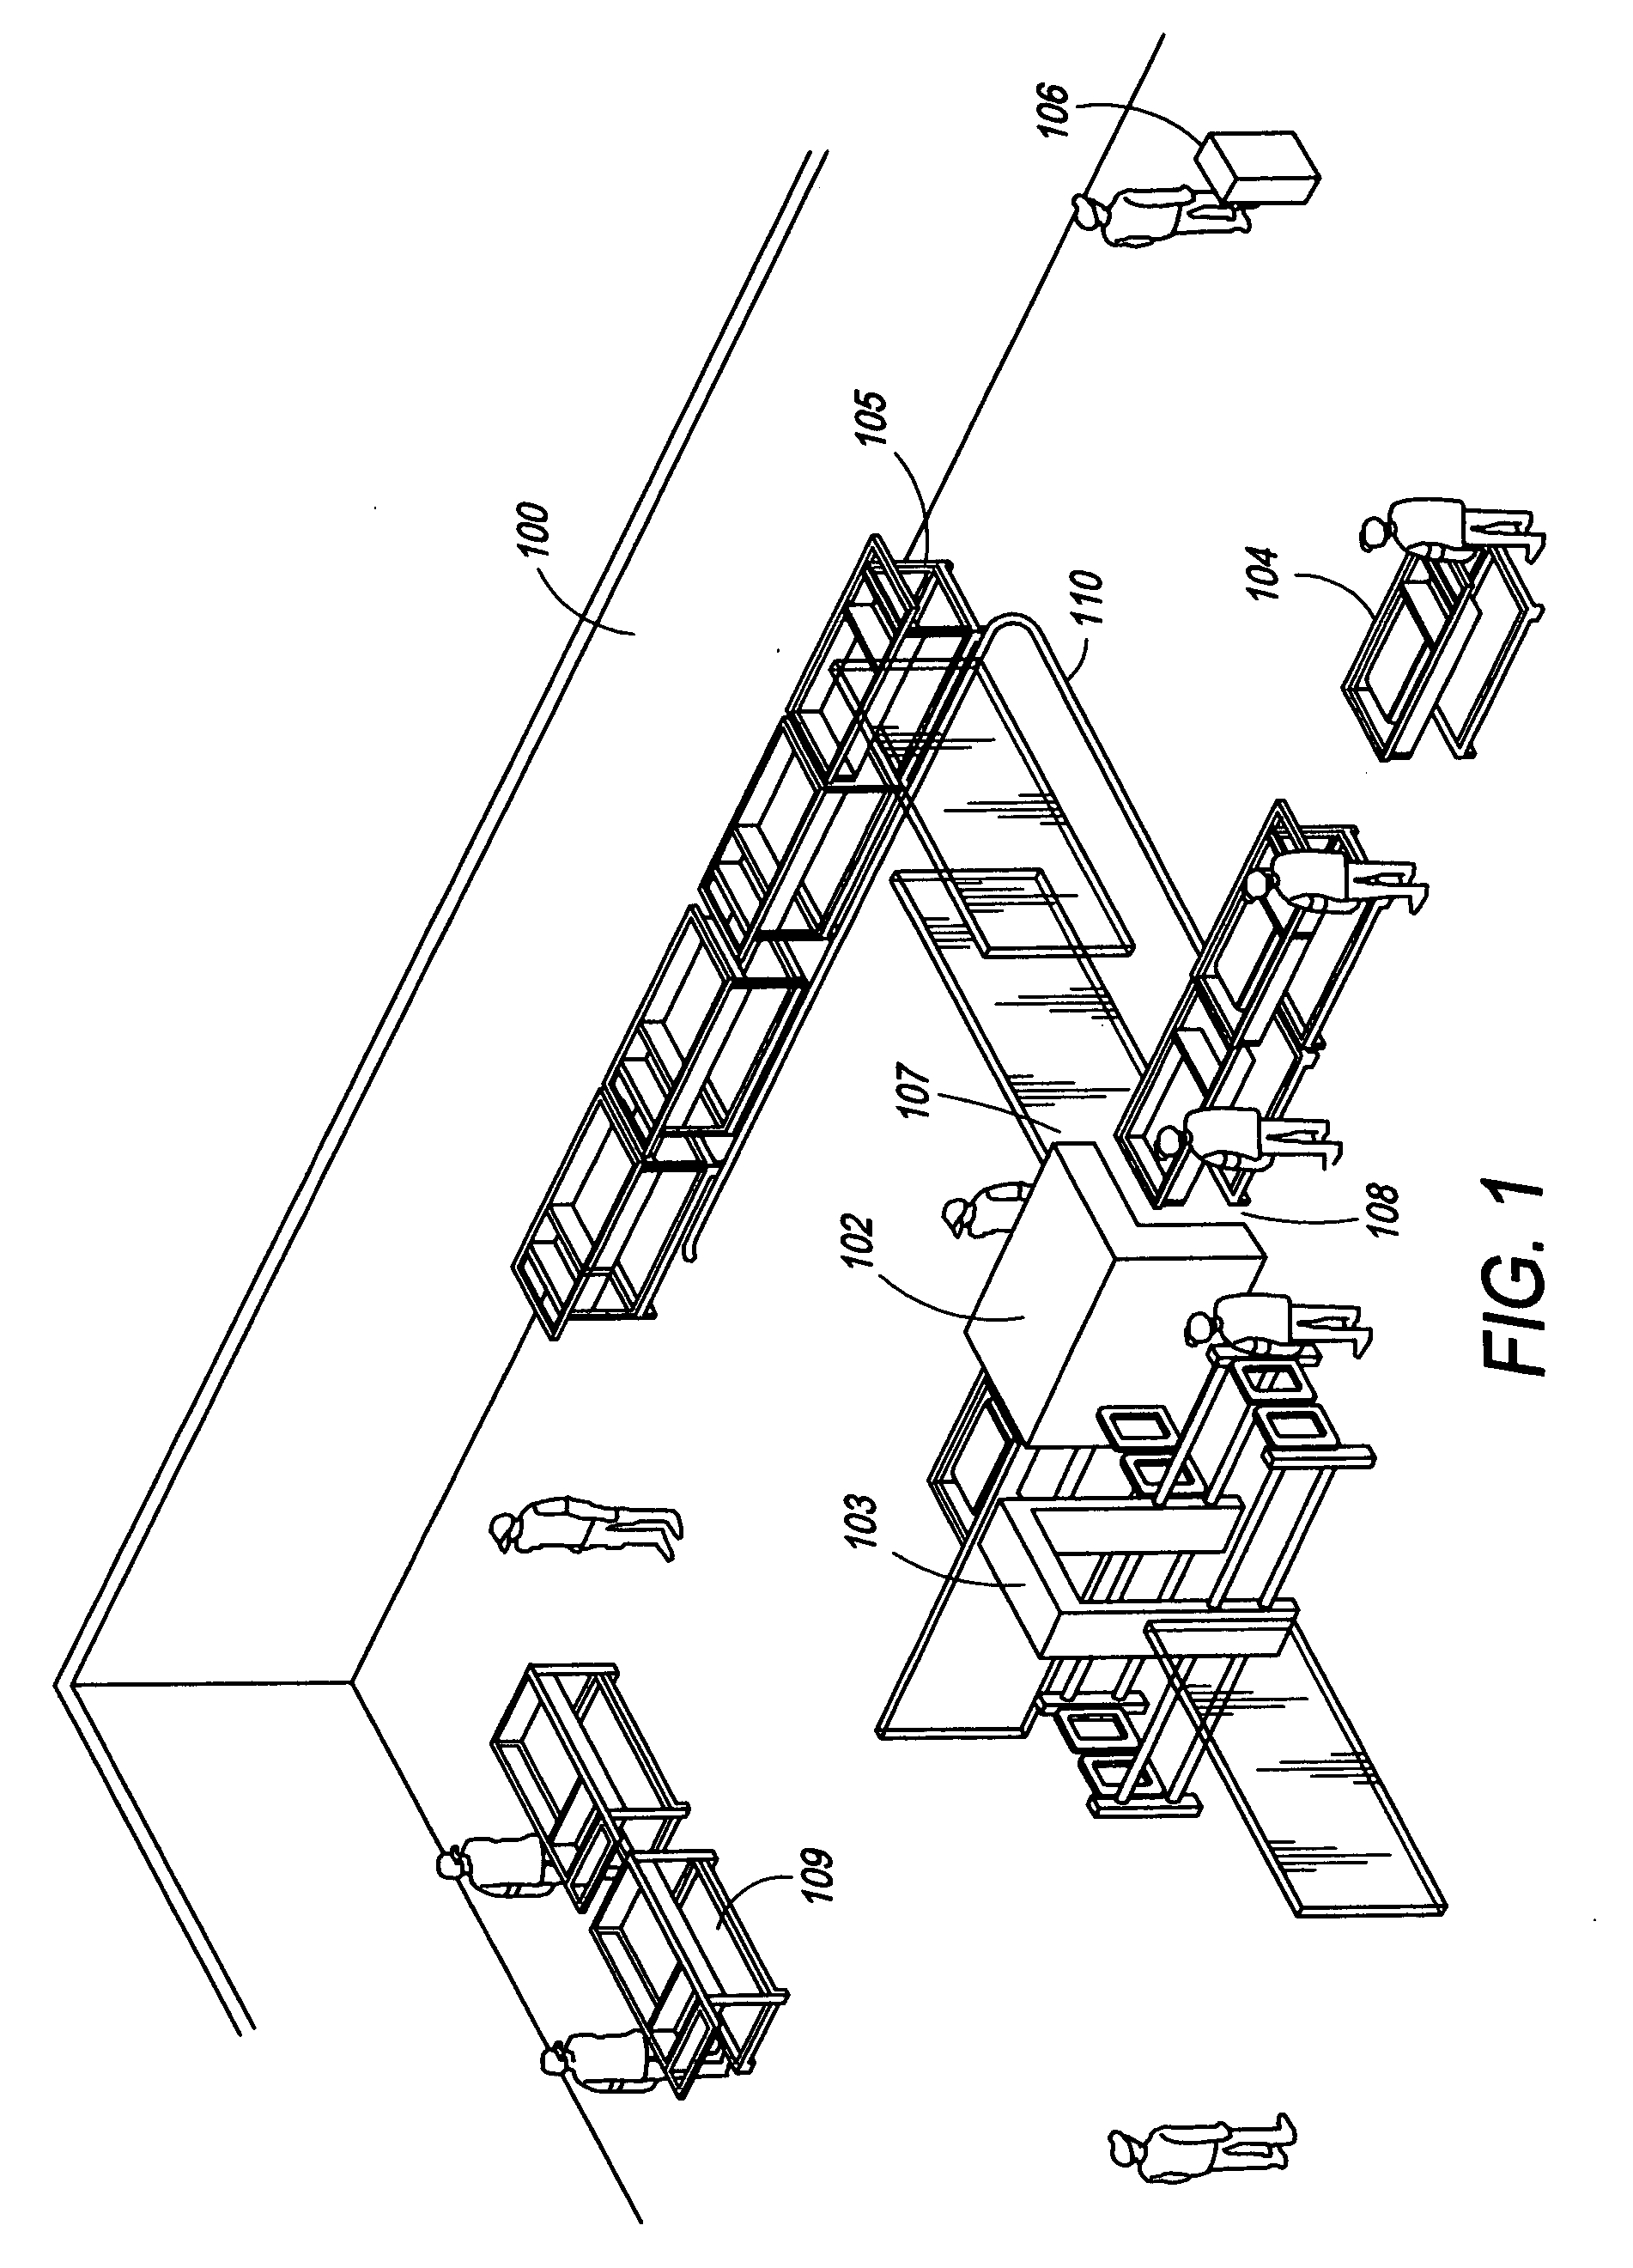 Integrated carry-on baggage cart and passenger screening station